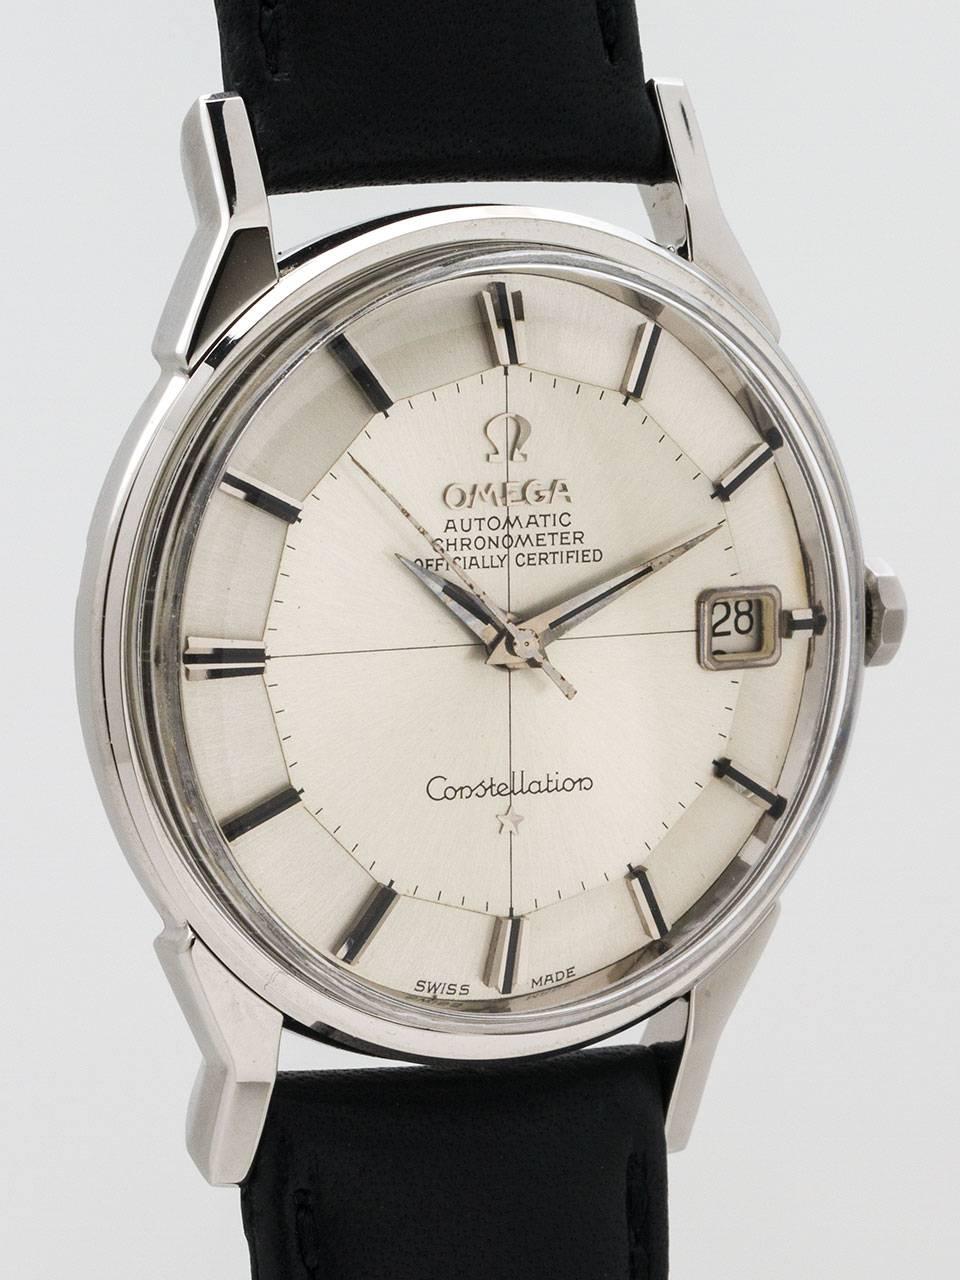 Omega Stainless Steel Constellation Wristwatch ref 14900-62 SC circa 1962. Featuring a 34 x 43.5 mm case with heavy snap down back with deeply embossed Observatory logo. Beautiful condition original pie pan dial with cross hairs design and applied